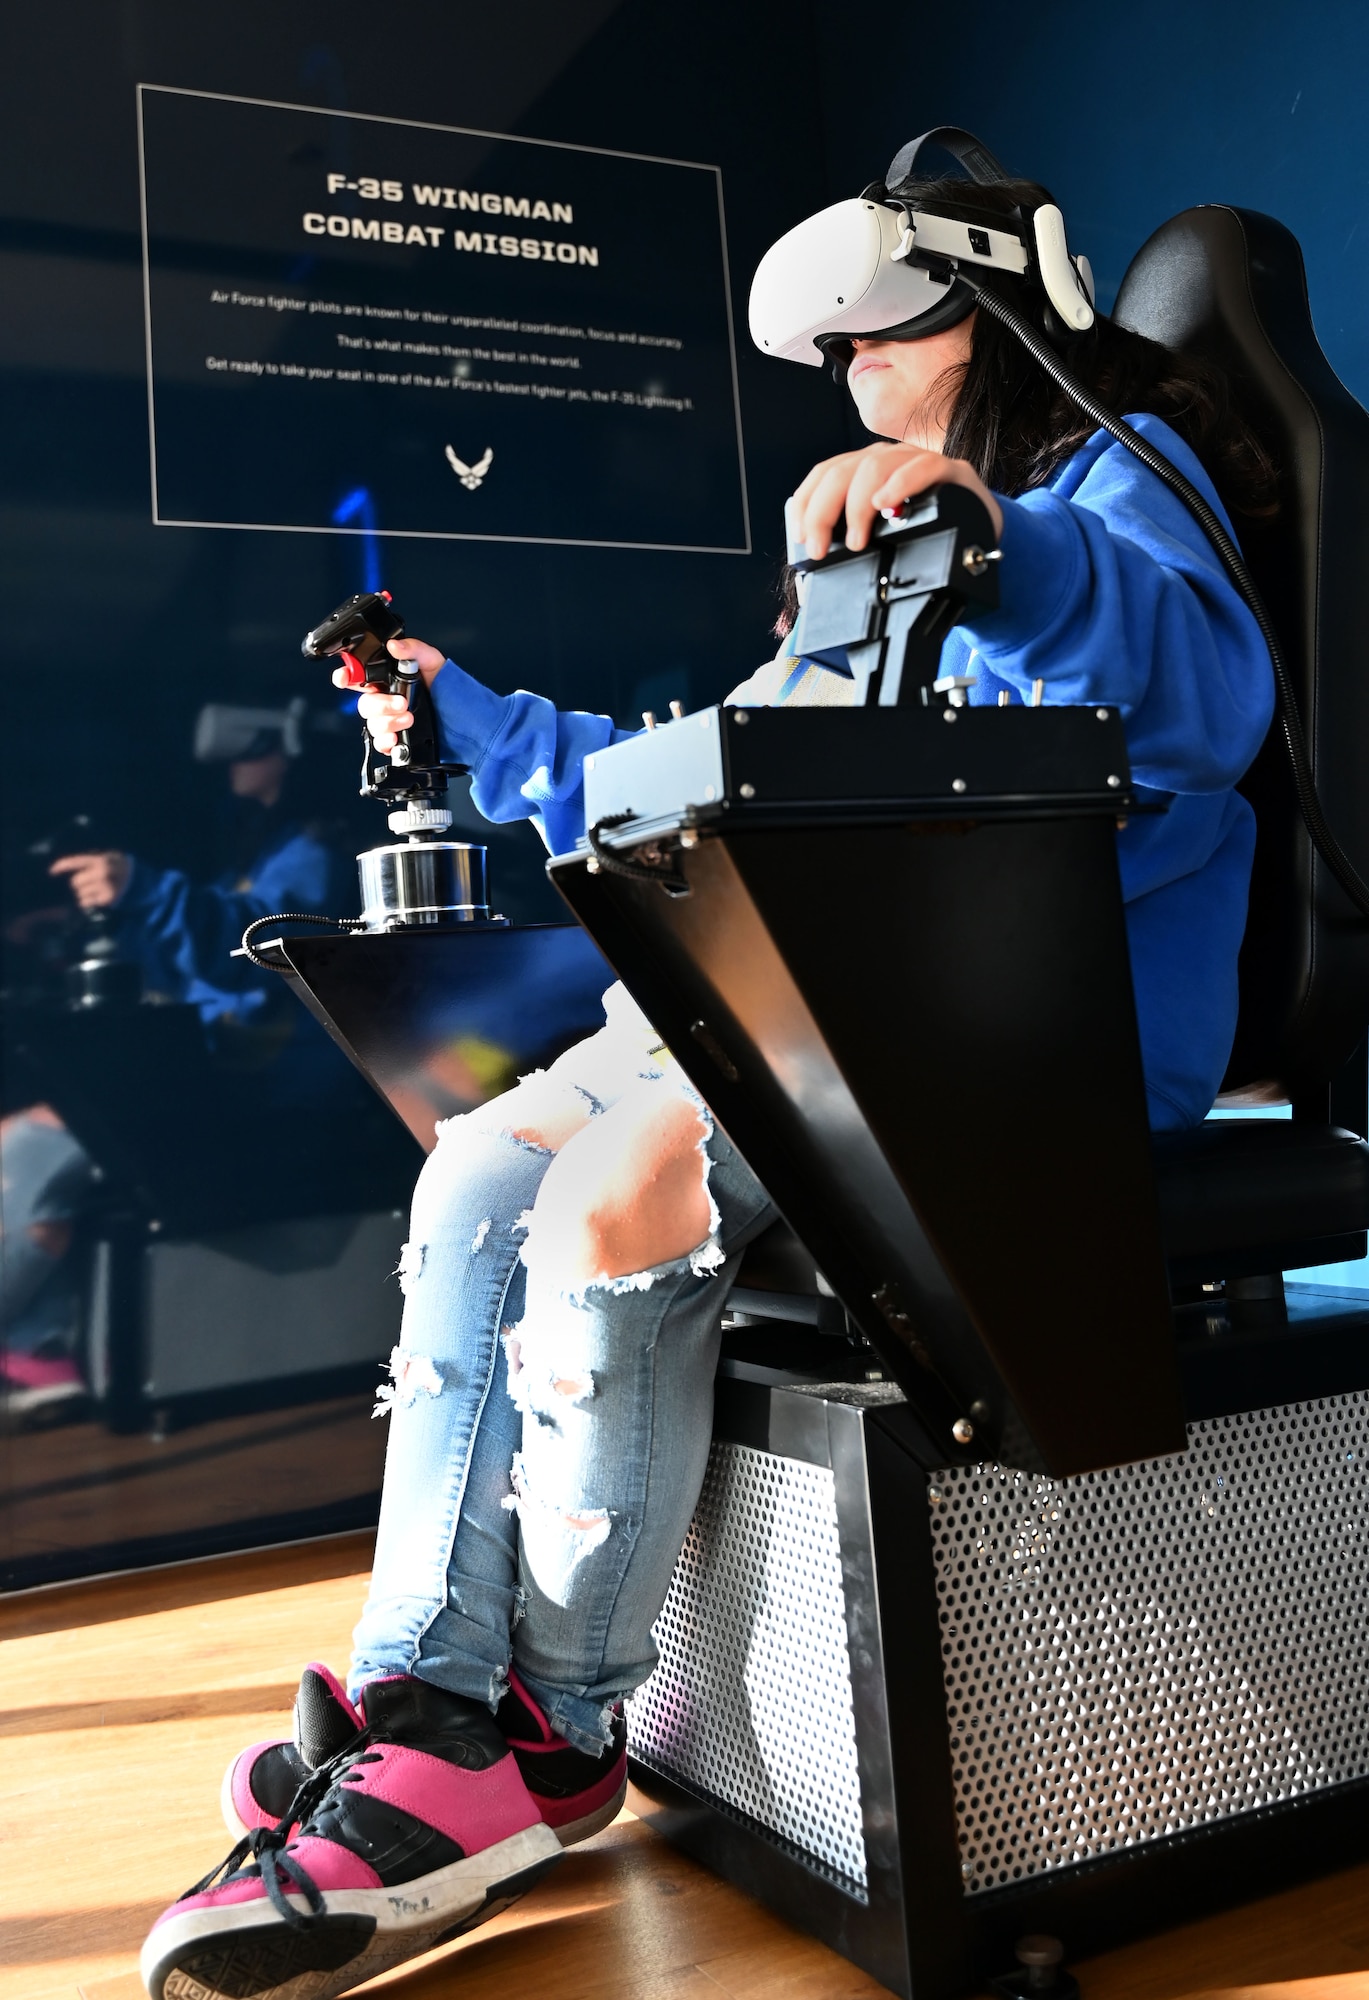 High school students operate an Air Force F-35 computer flight simulation